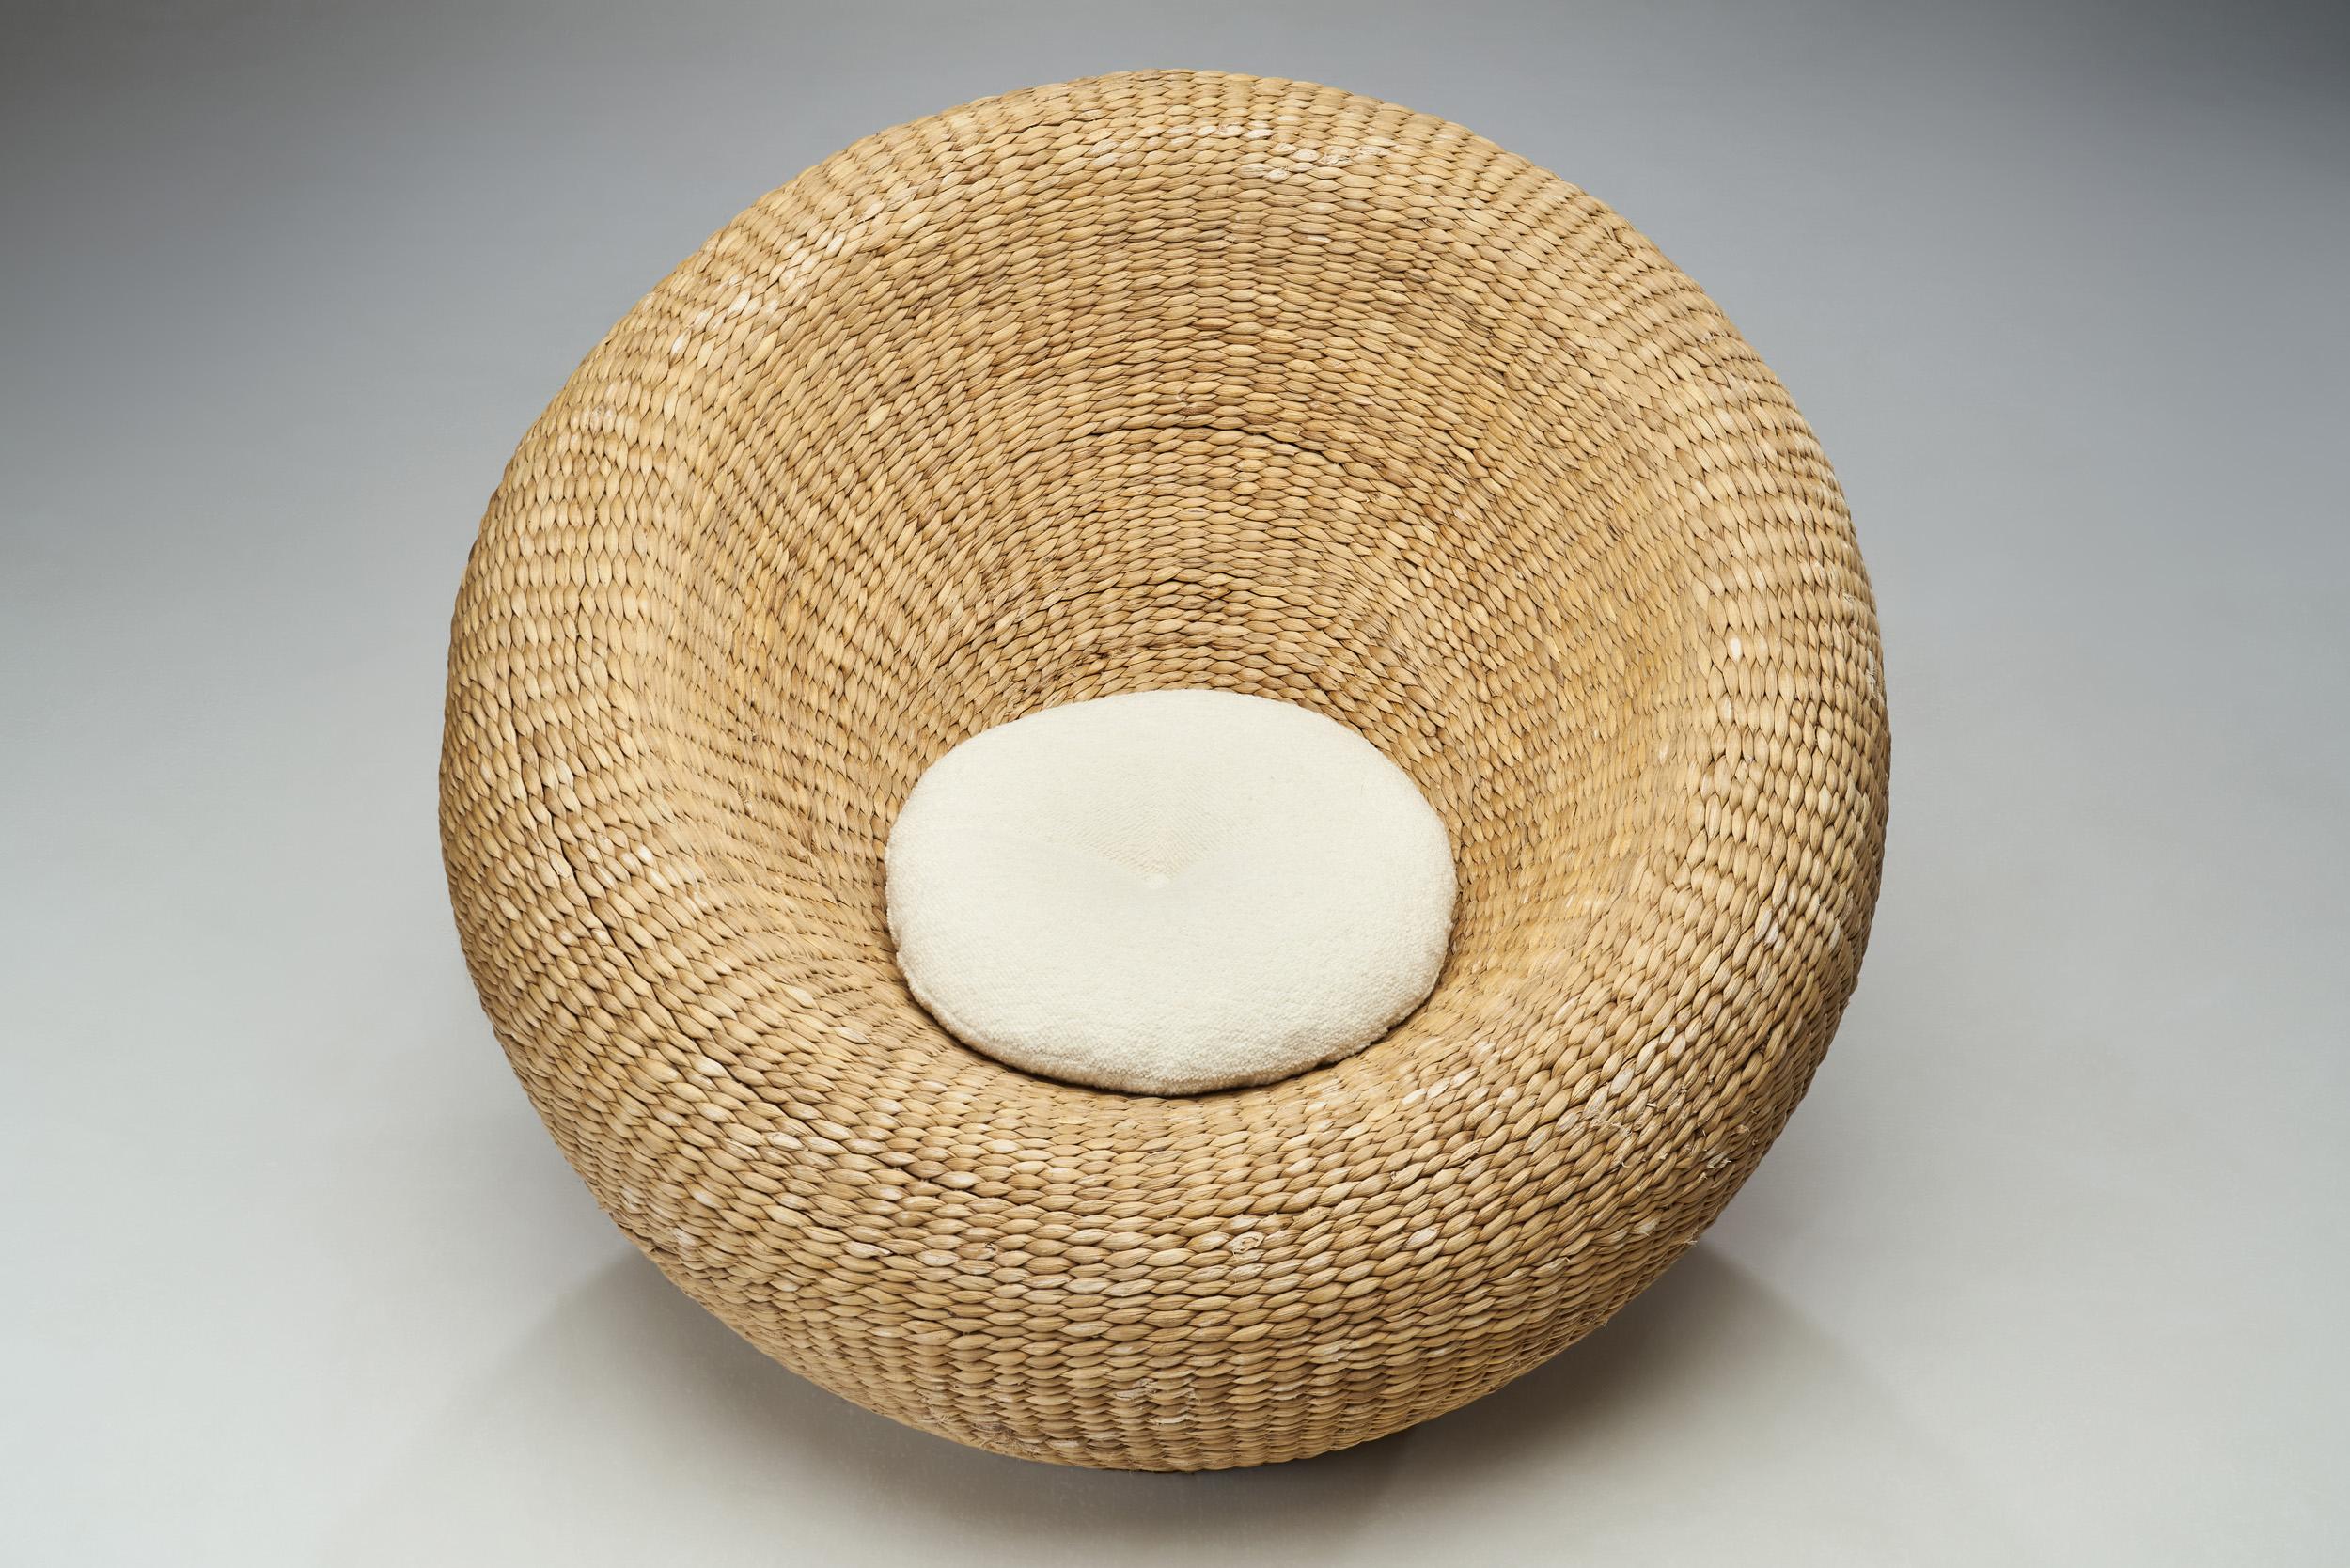 Mid-Century Modern Woven Wicker Bird's Nest Chair in the Manner of Isamu Kenmochi, Europe, ca 1960s For Sale